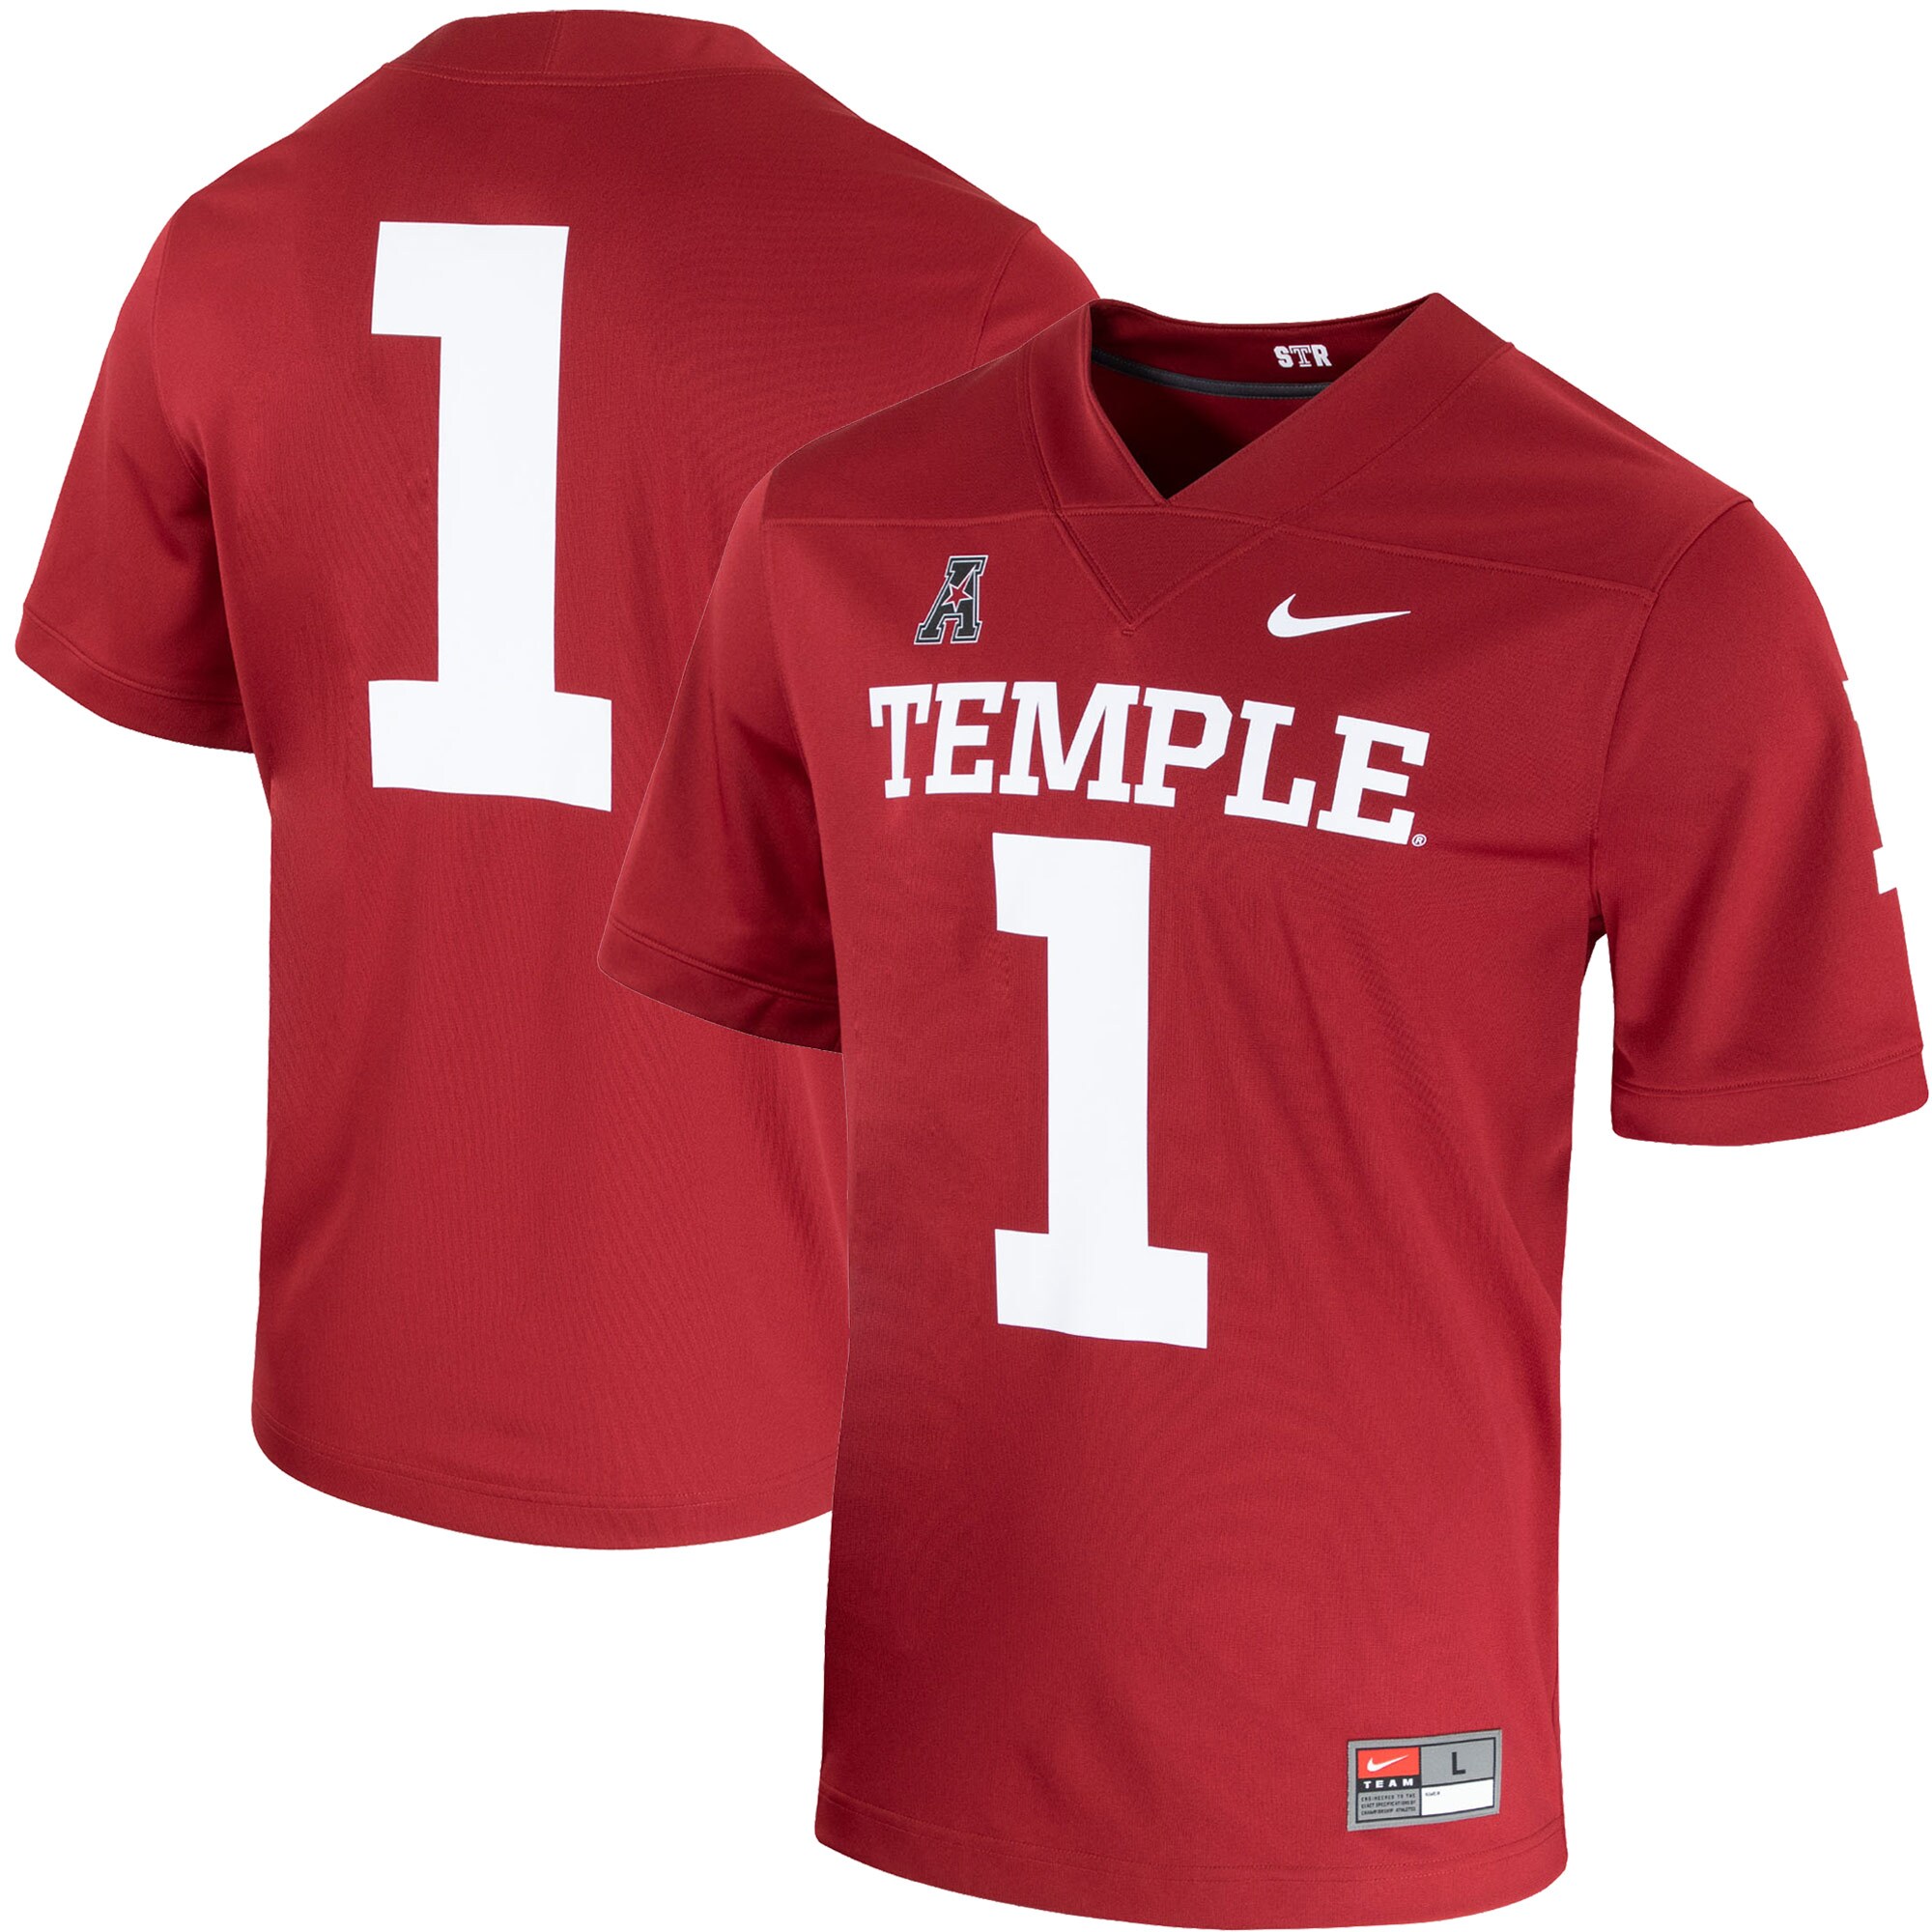 #1 Temple Owls  Football Shirts Jersey - Cherry For Youth Women Men